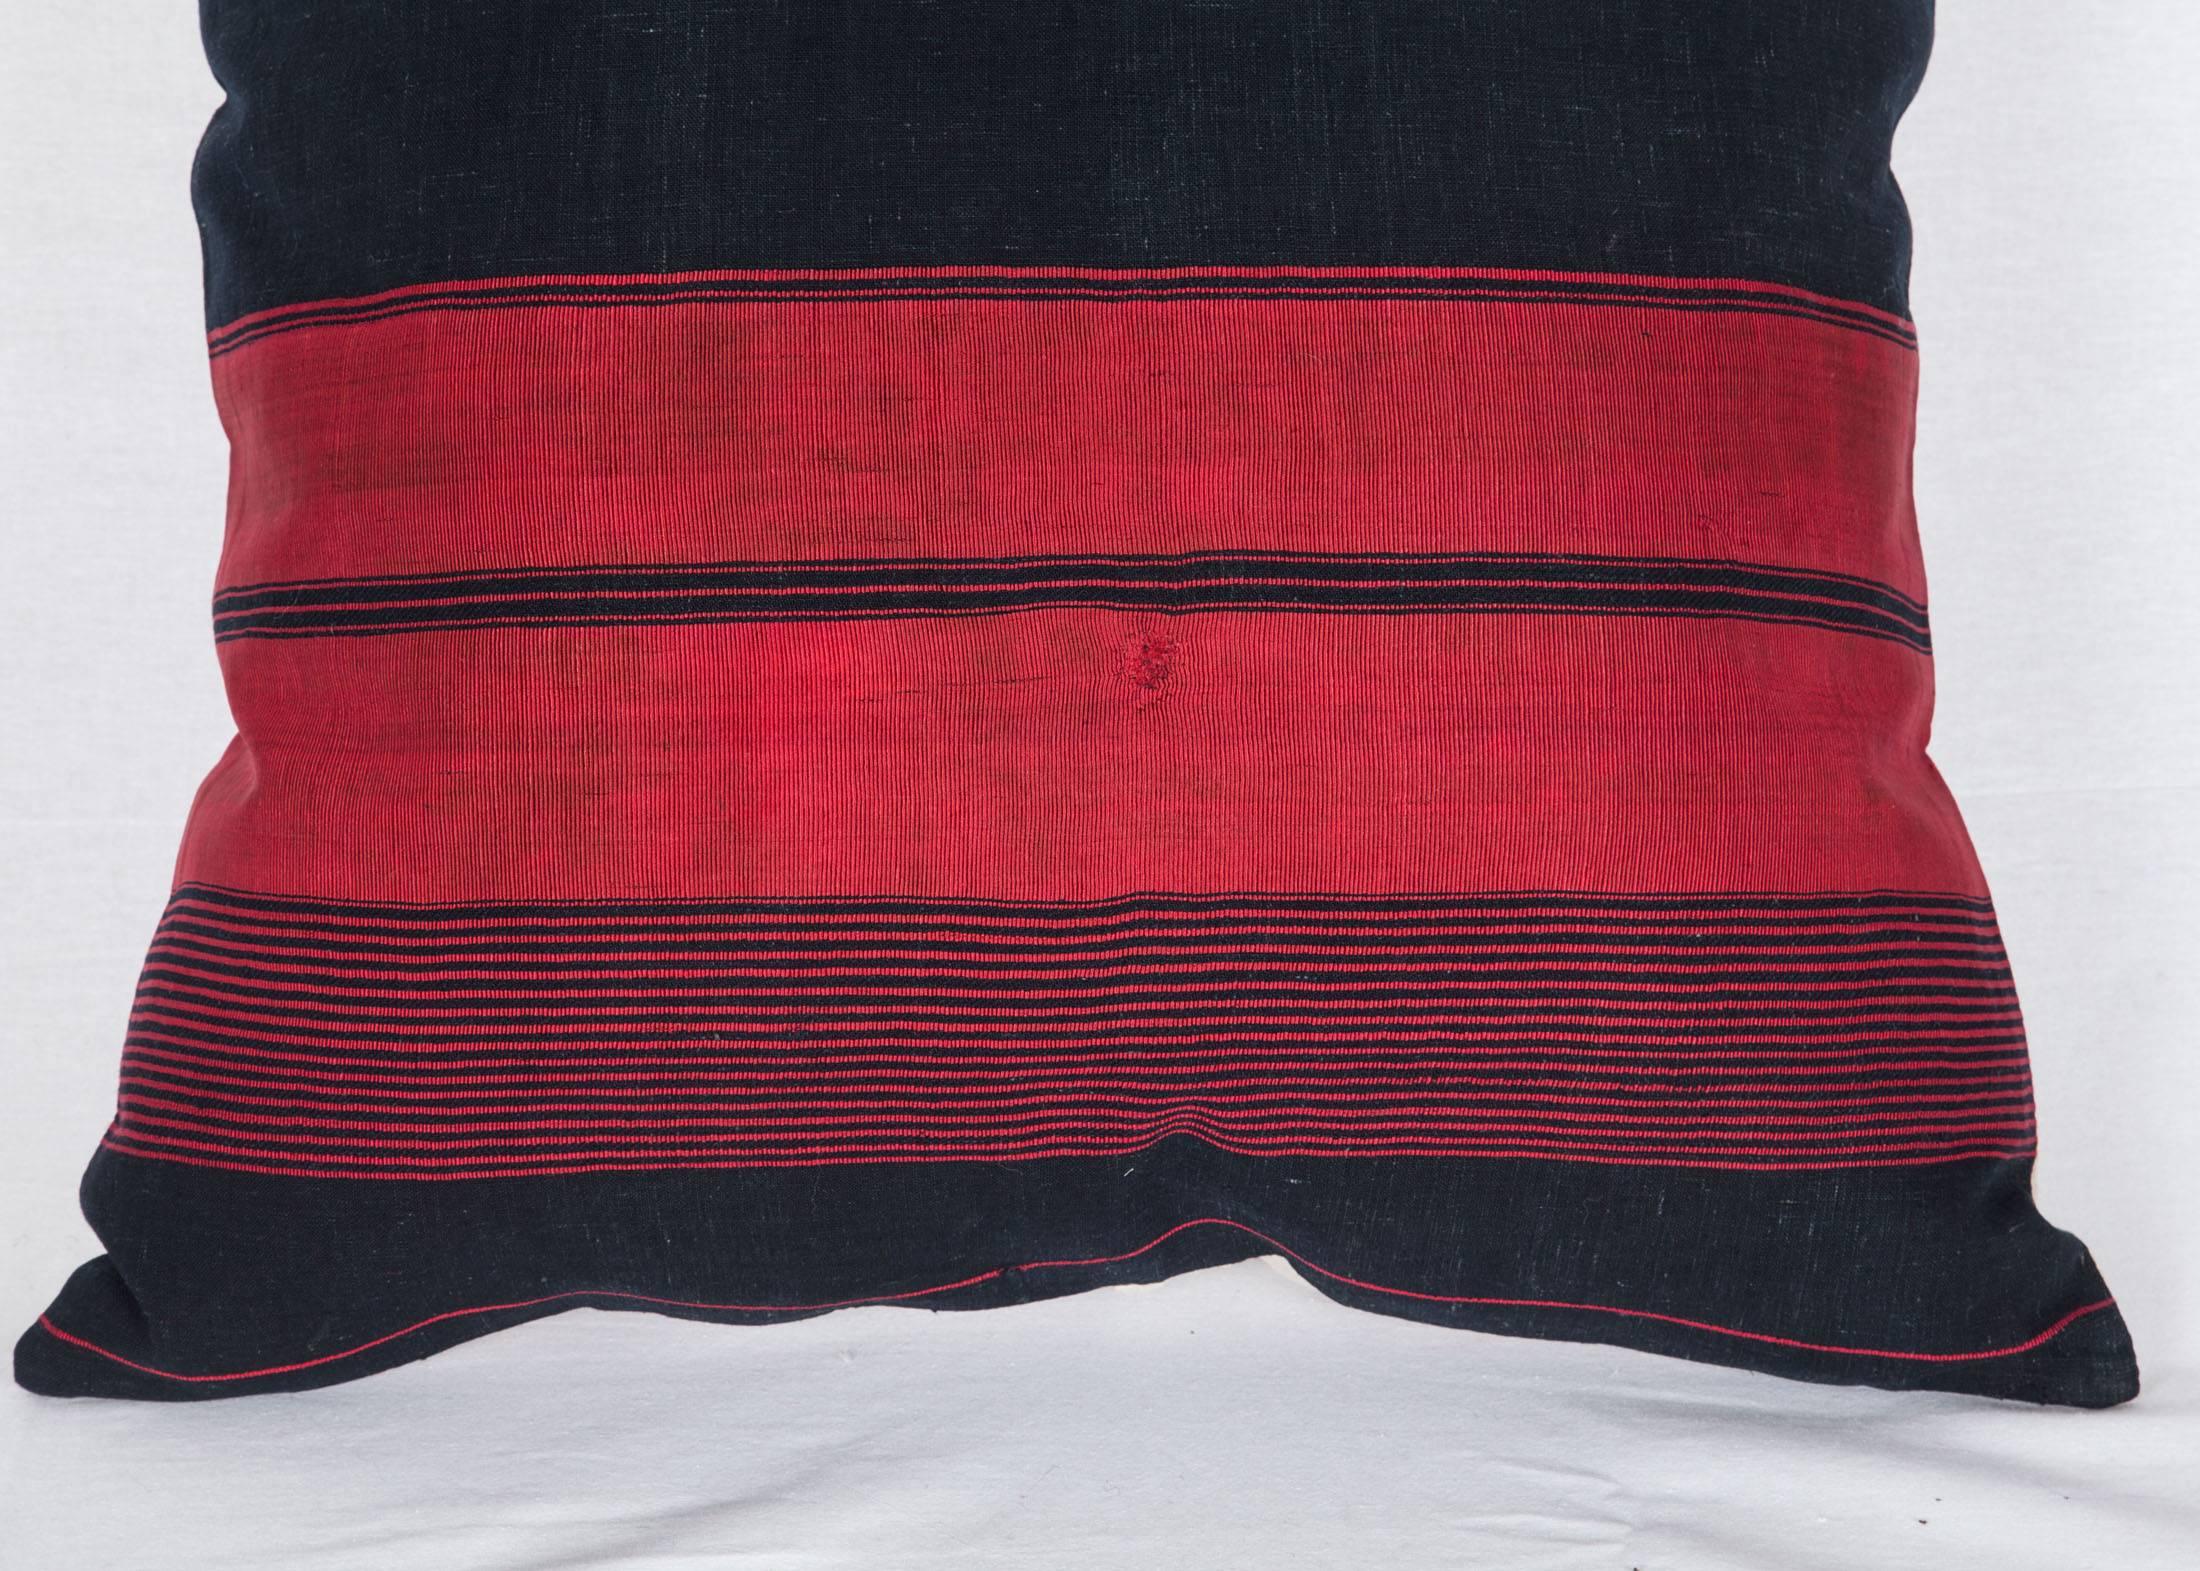 The pillow is made out of a late 19th-early 20th century Afghan Waziri Shawl. Red and indigo blue. It does not come with an insert but it comes with a bag made to the size and out of cotton to accommodate the filling. The backing is made of linen. 